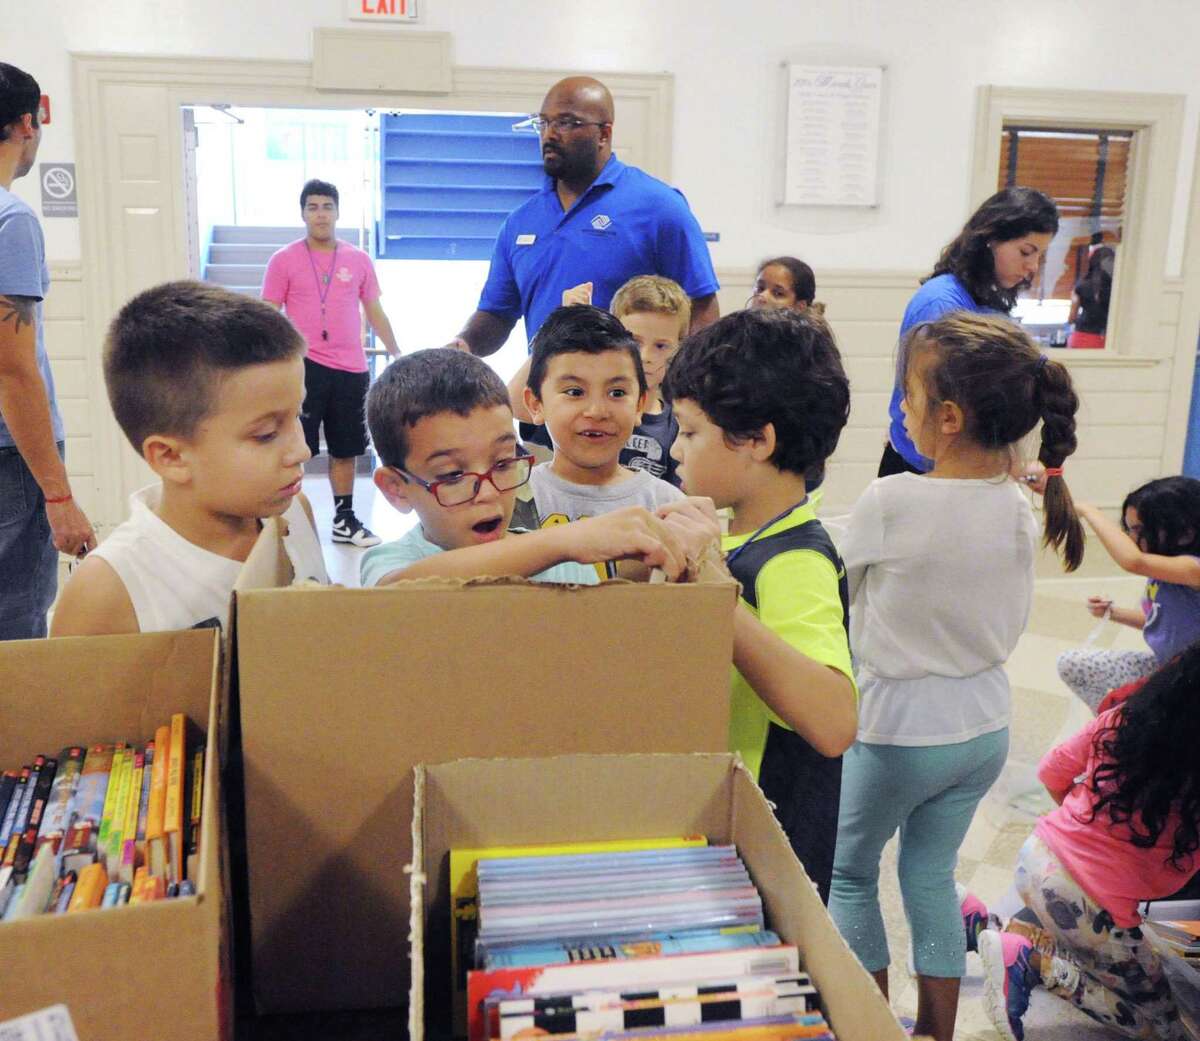 The Greenwich Alliance for Education book give-away to children at the Boys and Girls Club of Greenwich, Conn., Wednesday, Oct. 19, 2016. Julie Faryniarz, the executive director of the Greenwich Alliance for Education, said 3000 books were given away to club members.